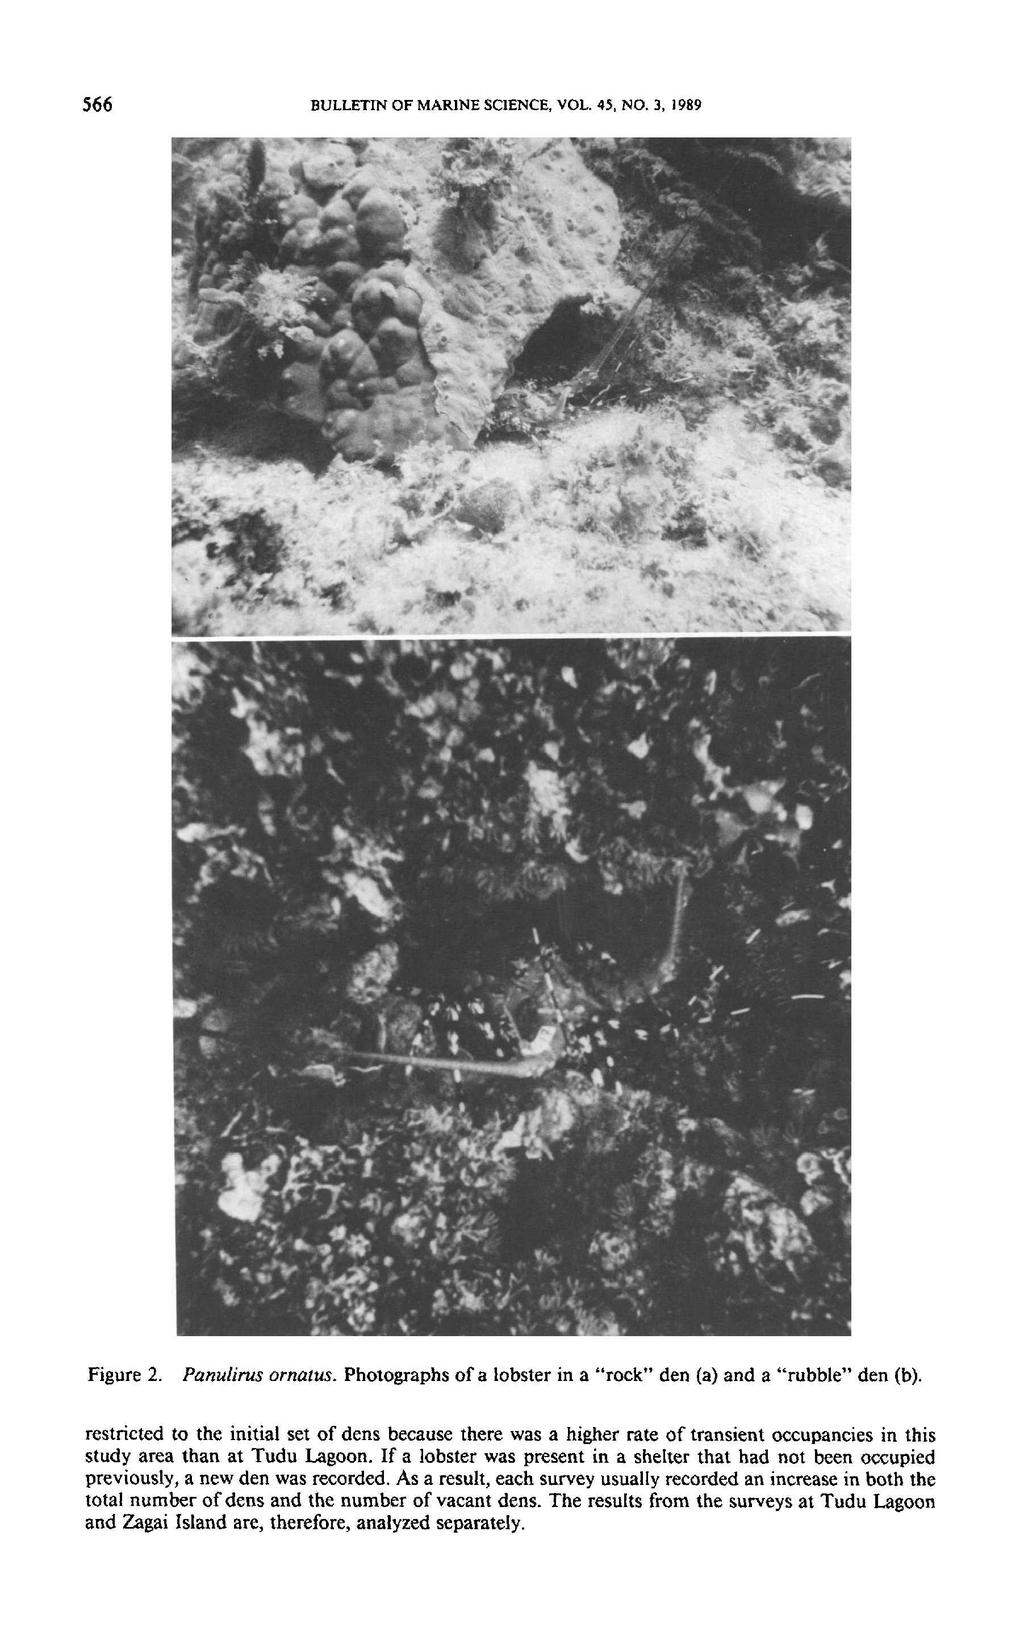 566 BULLETIN OF MARINE SCIENCE, VOL. 45, NO.3, 1989 Figure 2. Panulirus ornatus. Photographs of a lobster in a "rock" den (a) and a "rubble" den (b).